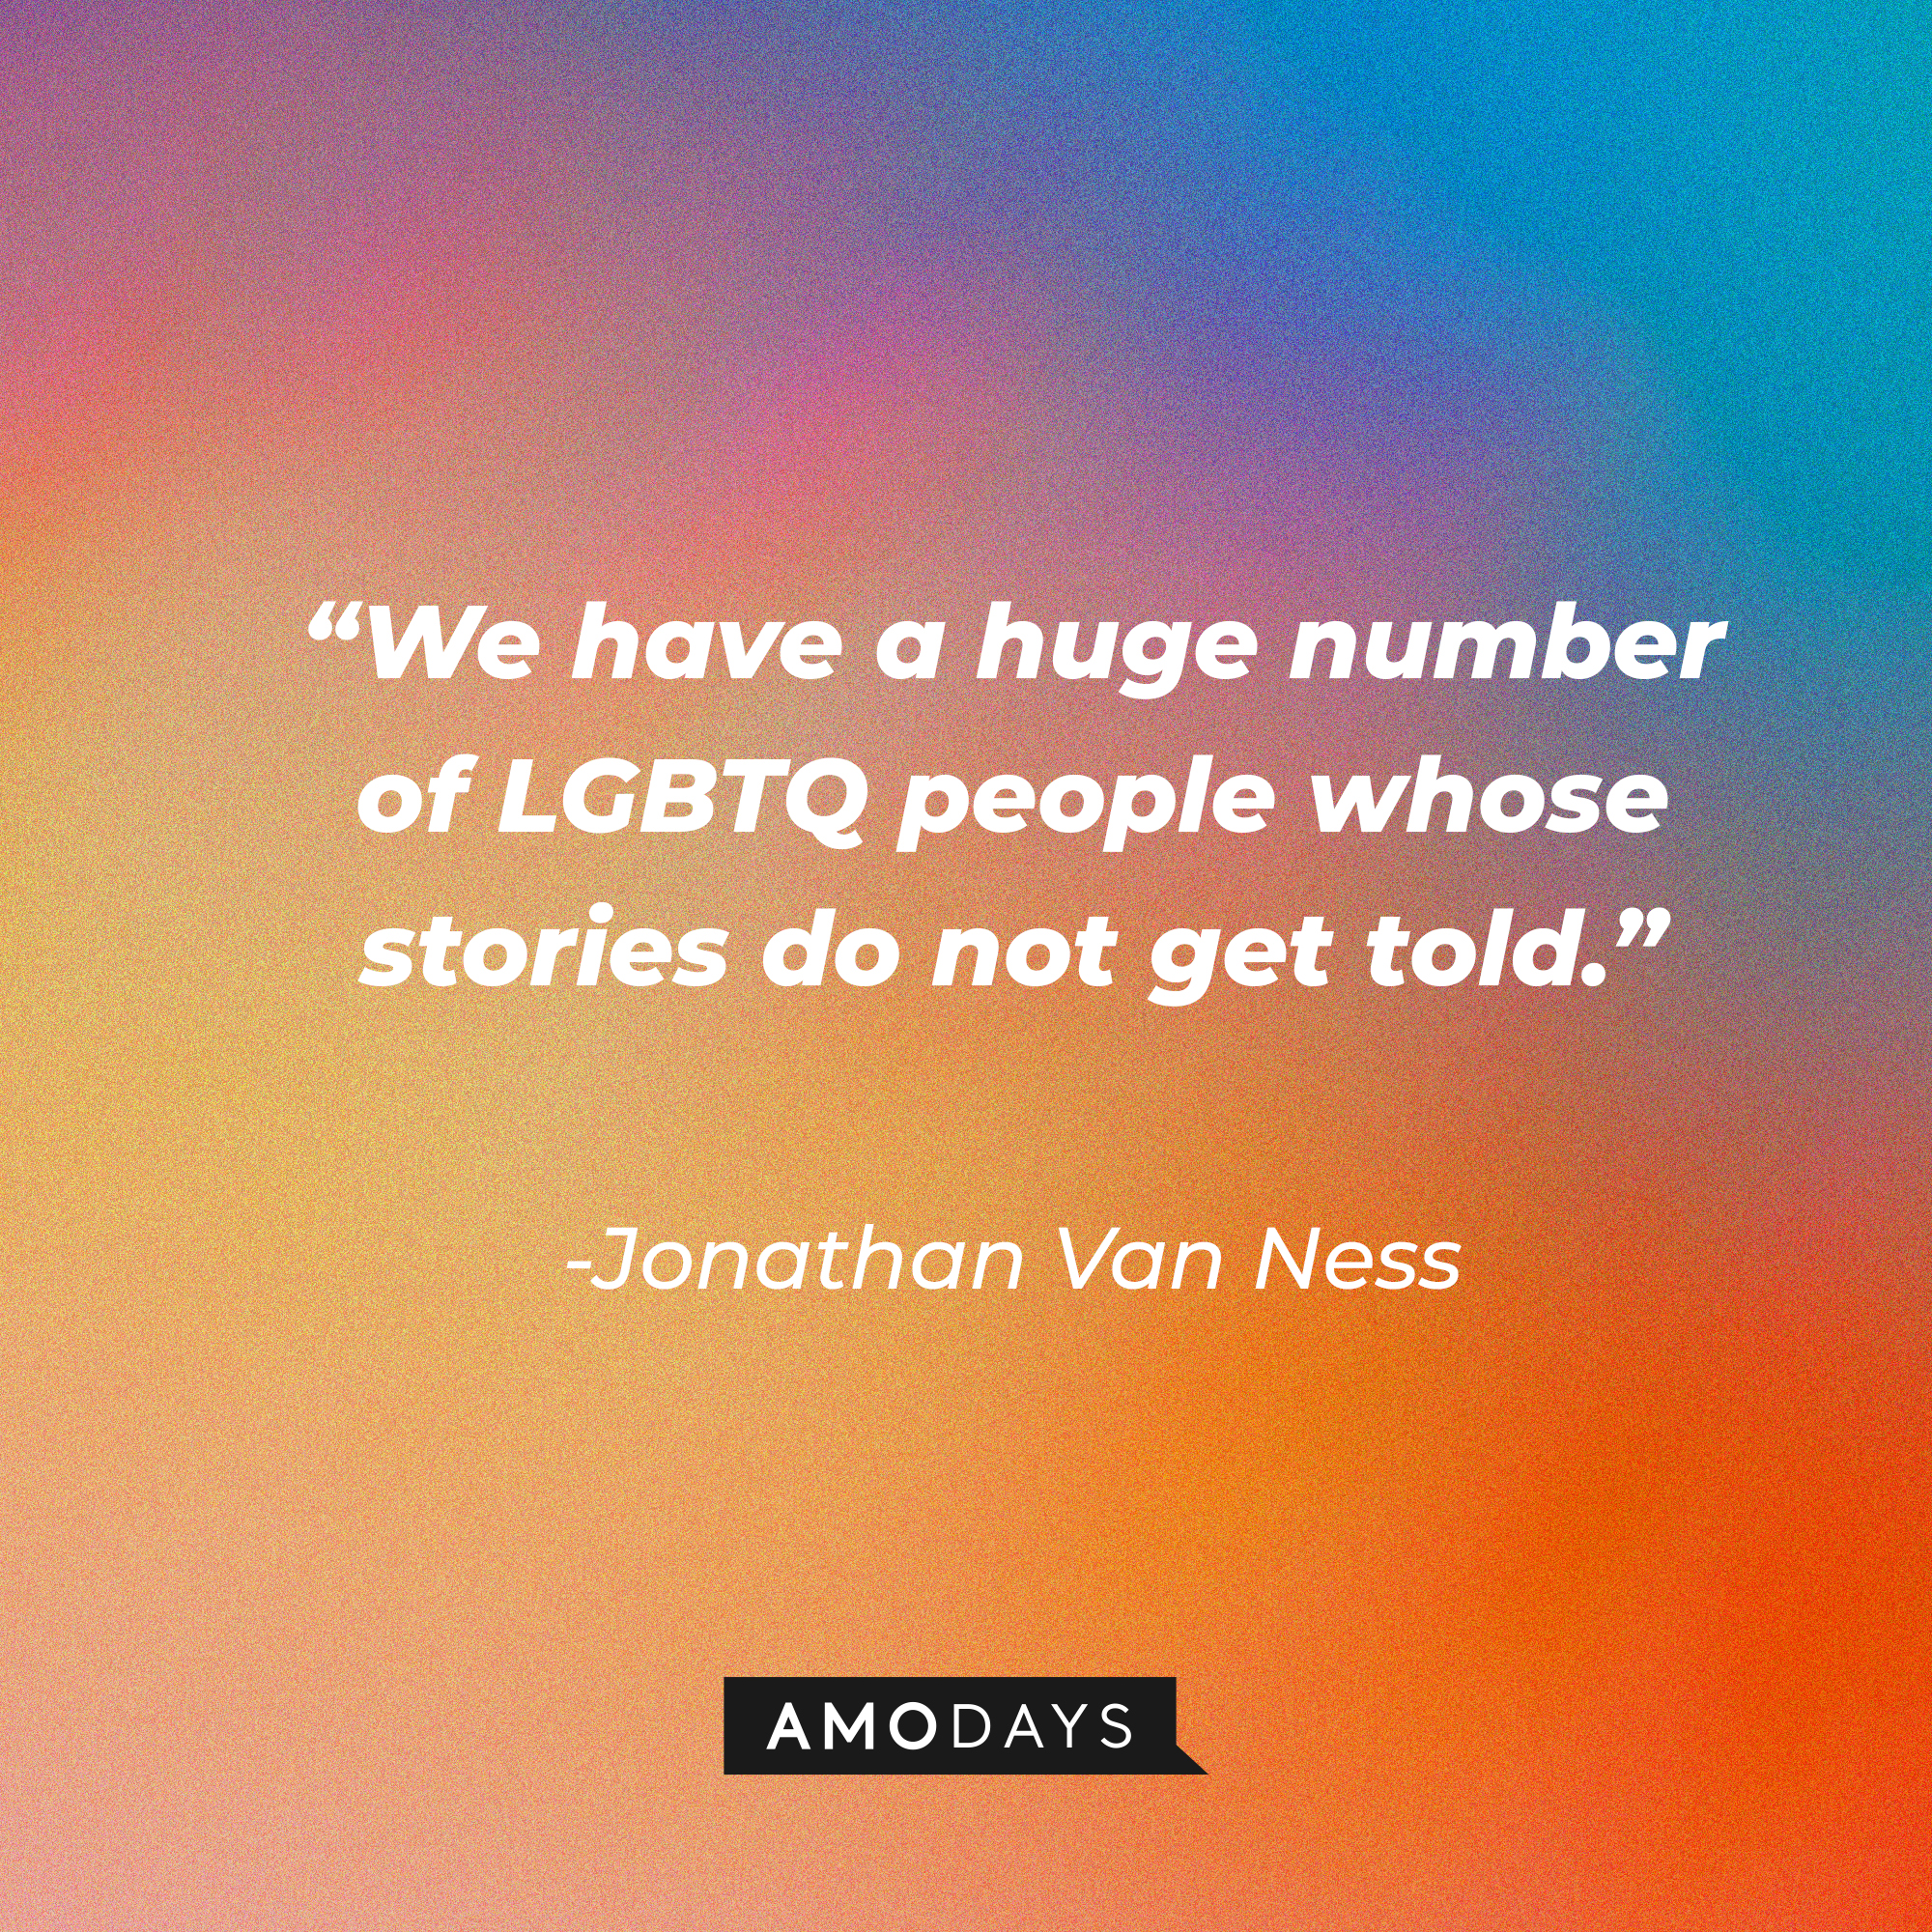 Jonathan Van Ness’s quote:  “We have a huge number of LGBTQ people whose stories do not get told." | Source: AmoDays